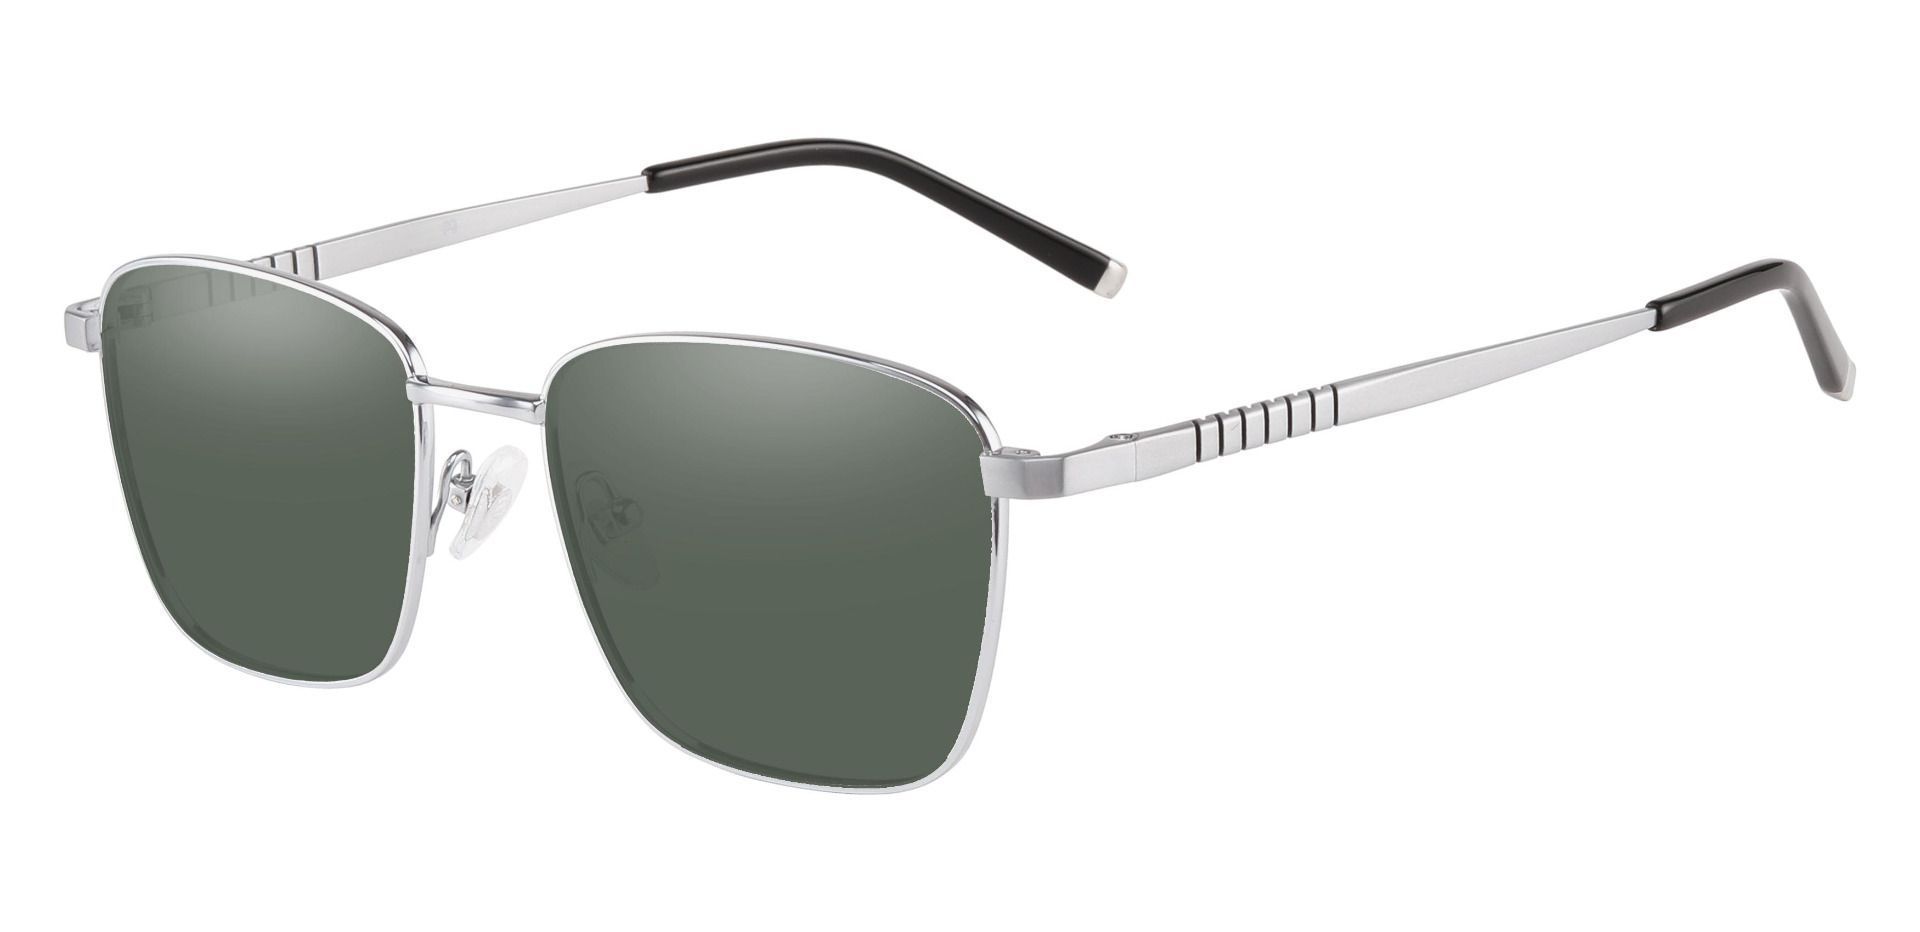 May Square Progressive Sunglasses - Silver Frame With Green Lenses